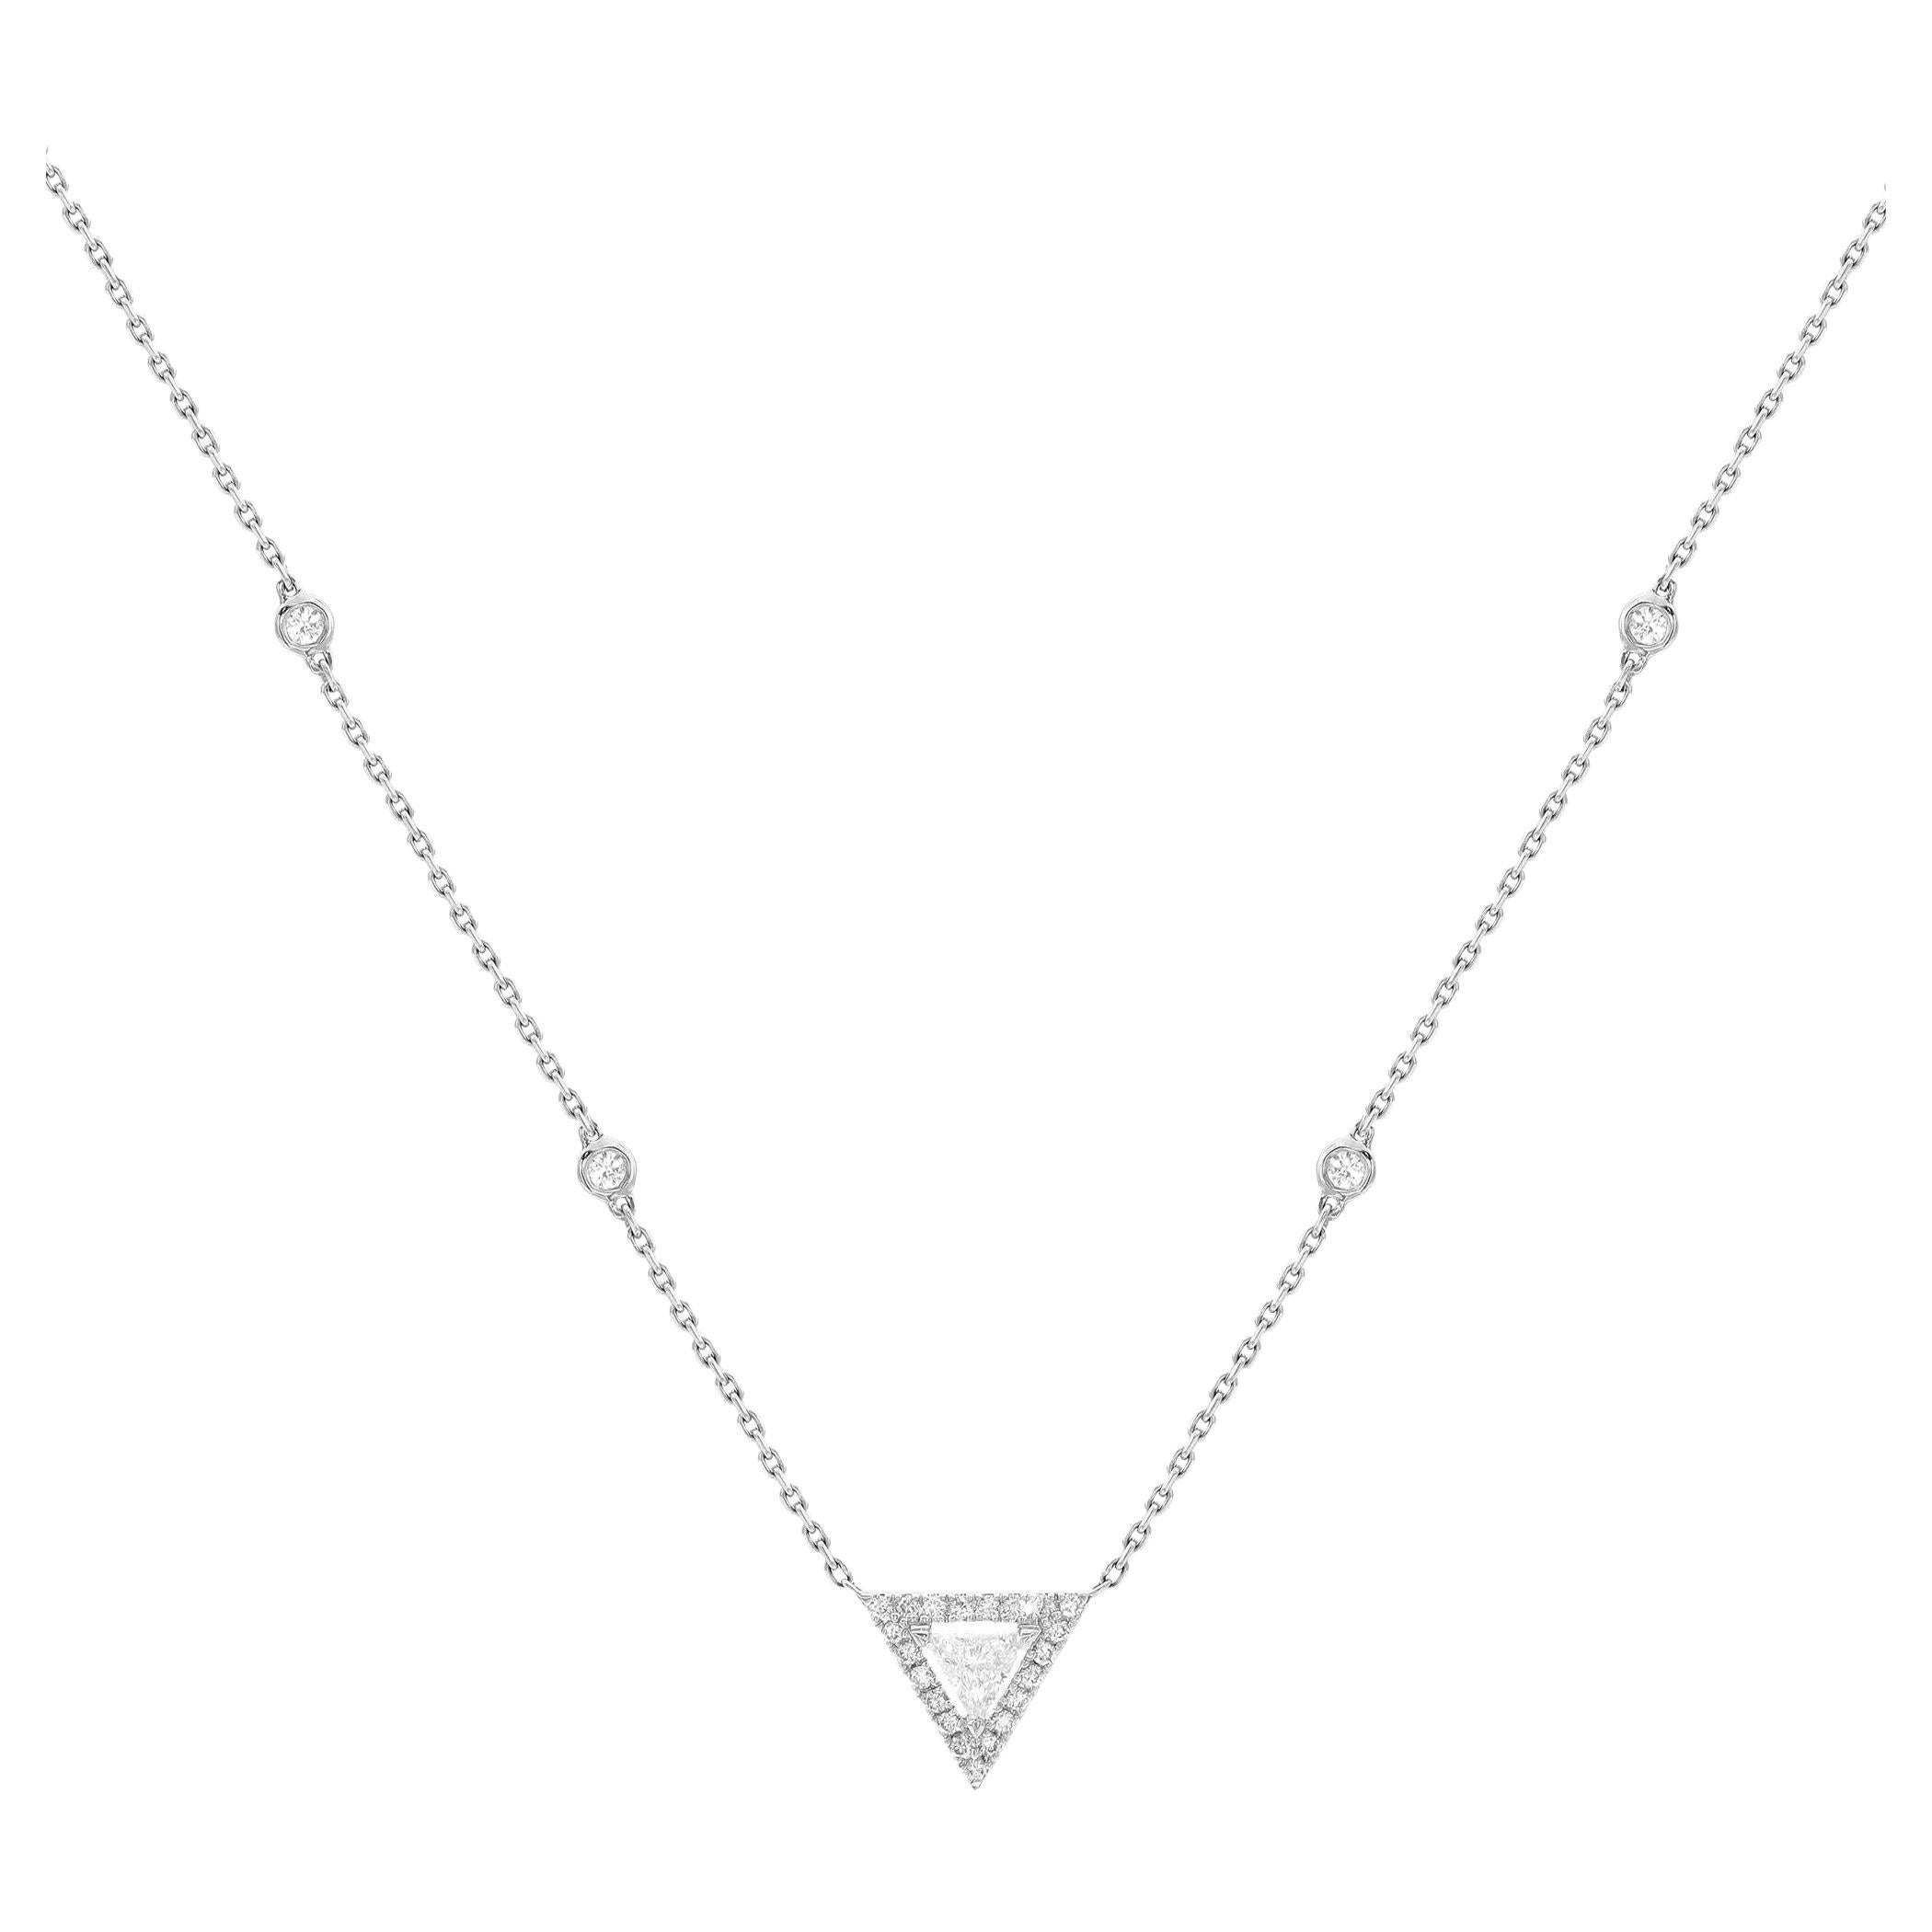 Messika 0.47Cttw Thea Diamond Chain Necklace 18K White Gold 17.5 Inches en vente